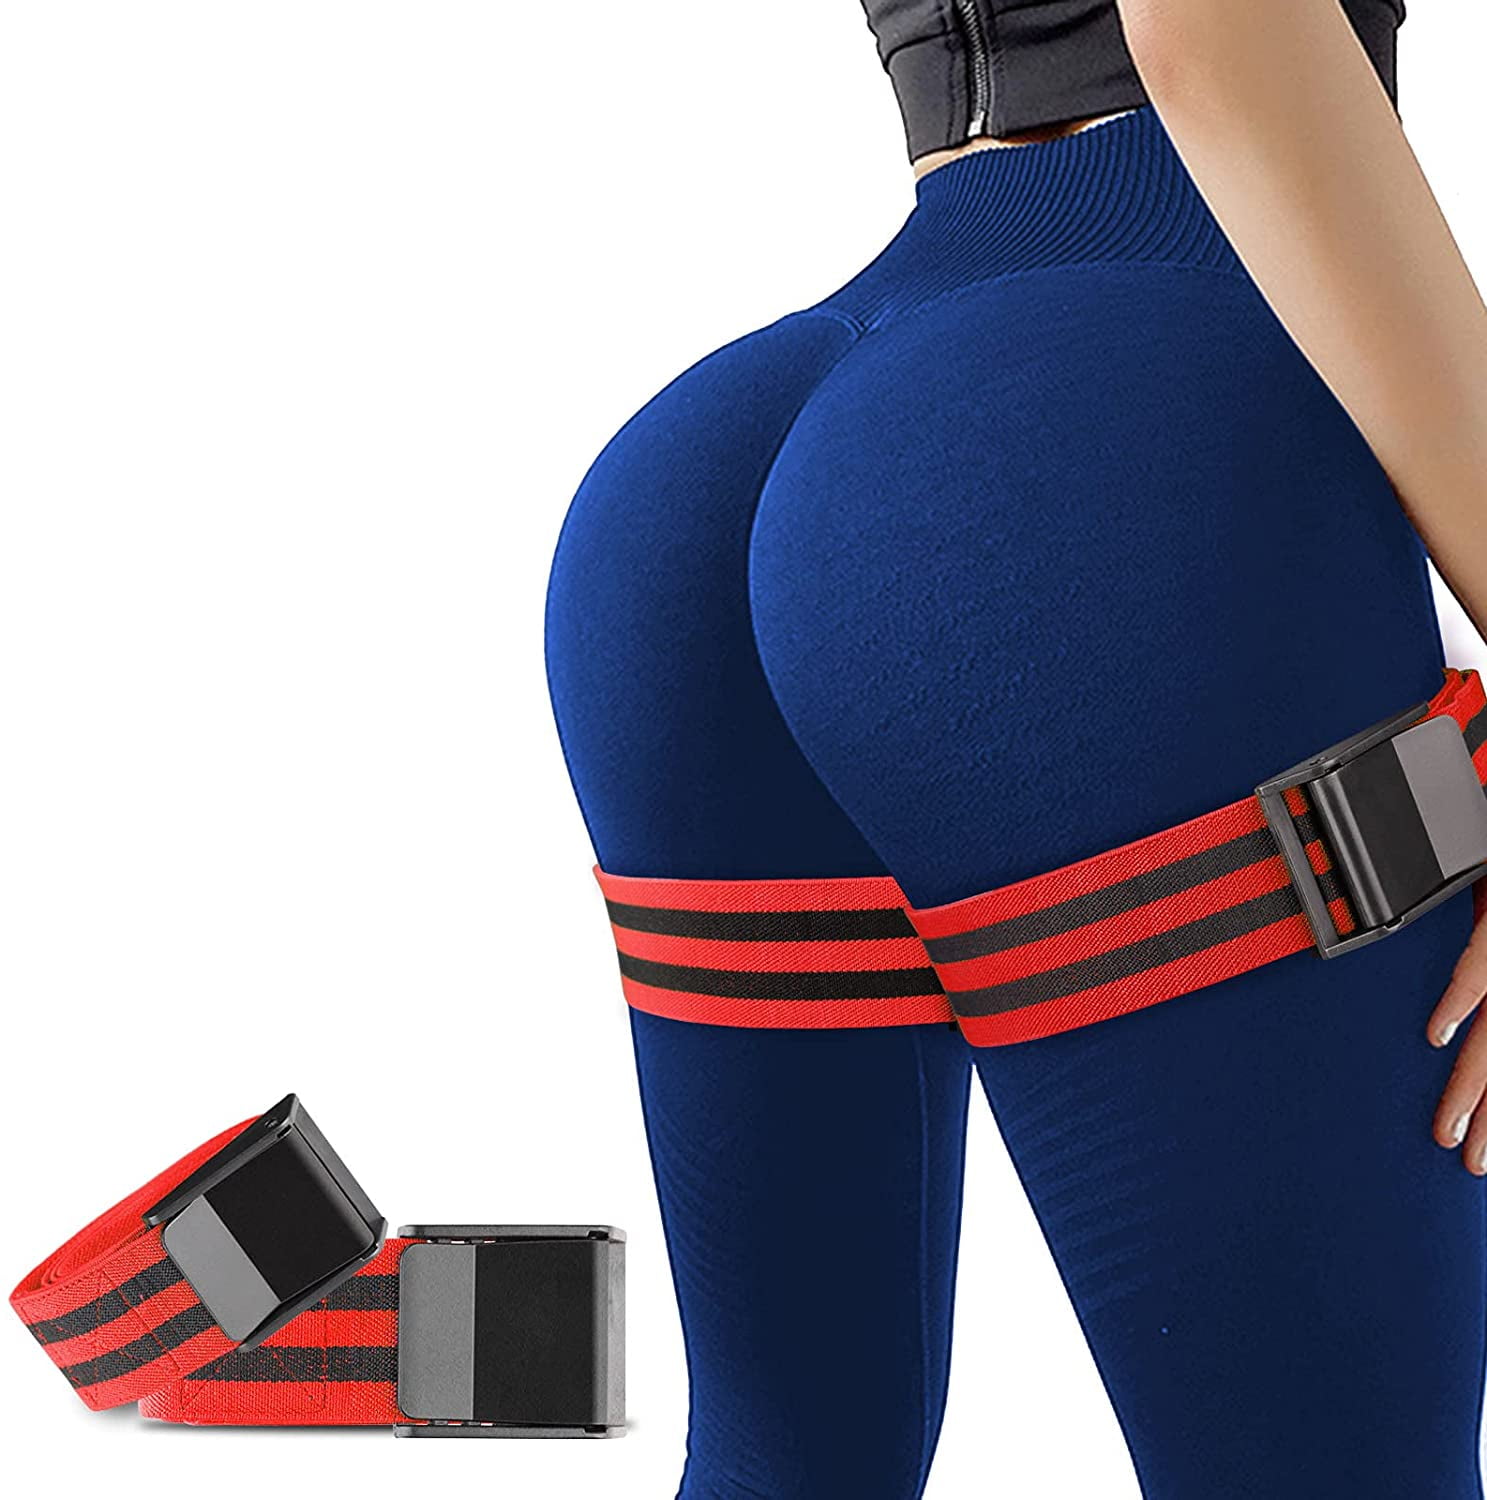 [Glute Bands] Blood Flow Restriction Bands for Women BFR Bands for Women  Glutes,Butt Workout Equipment for Women,Resistance Bands for Exercising  Your